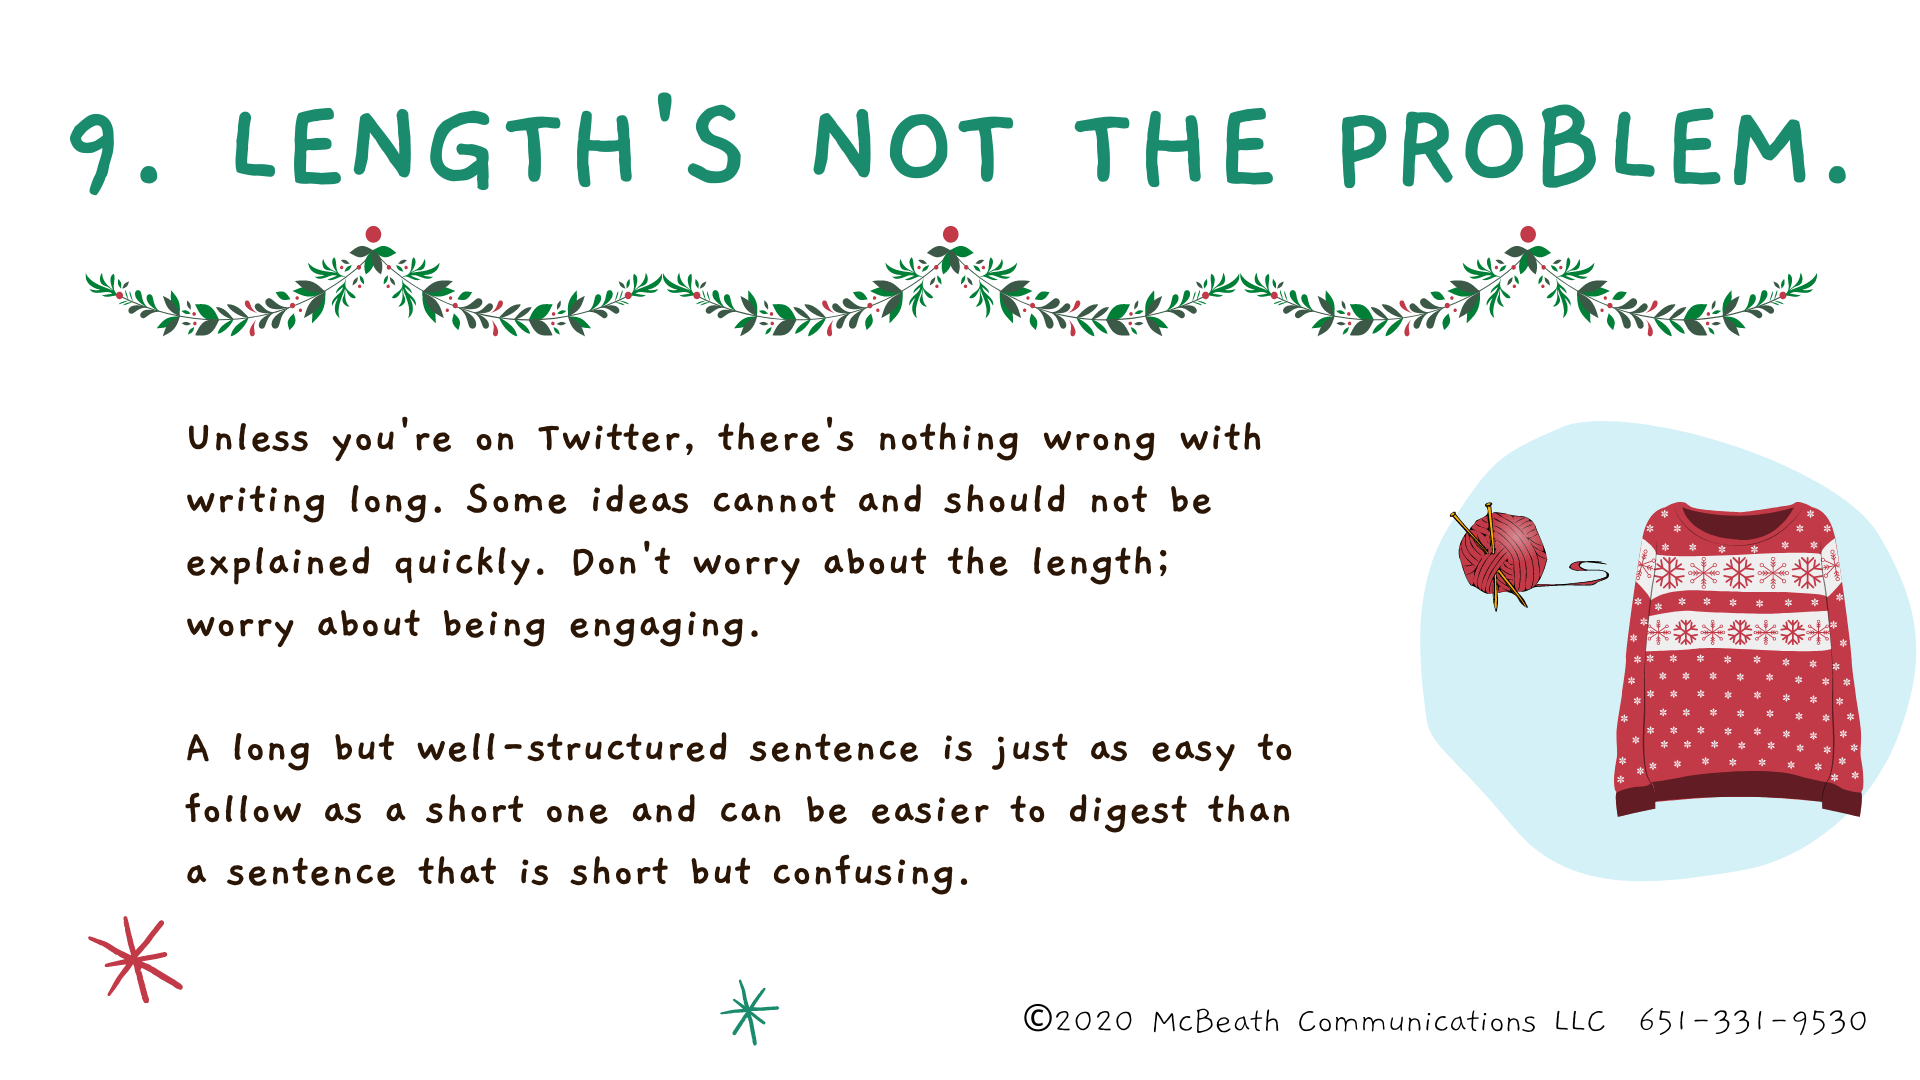 Length's not the problem